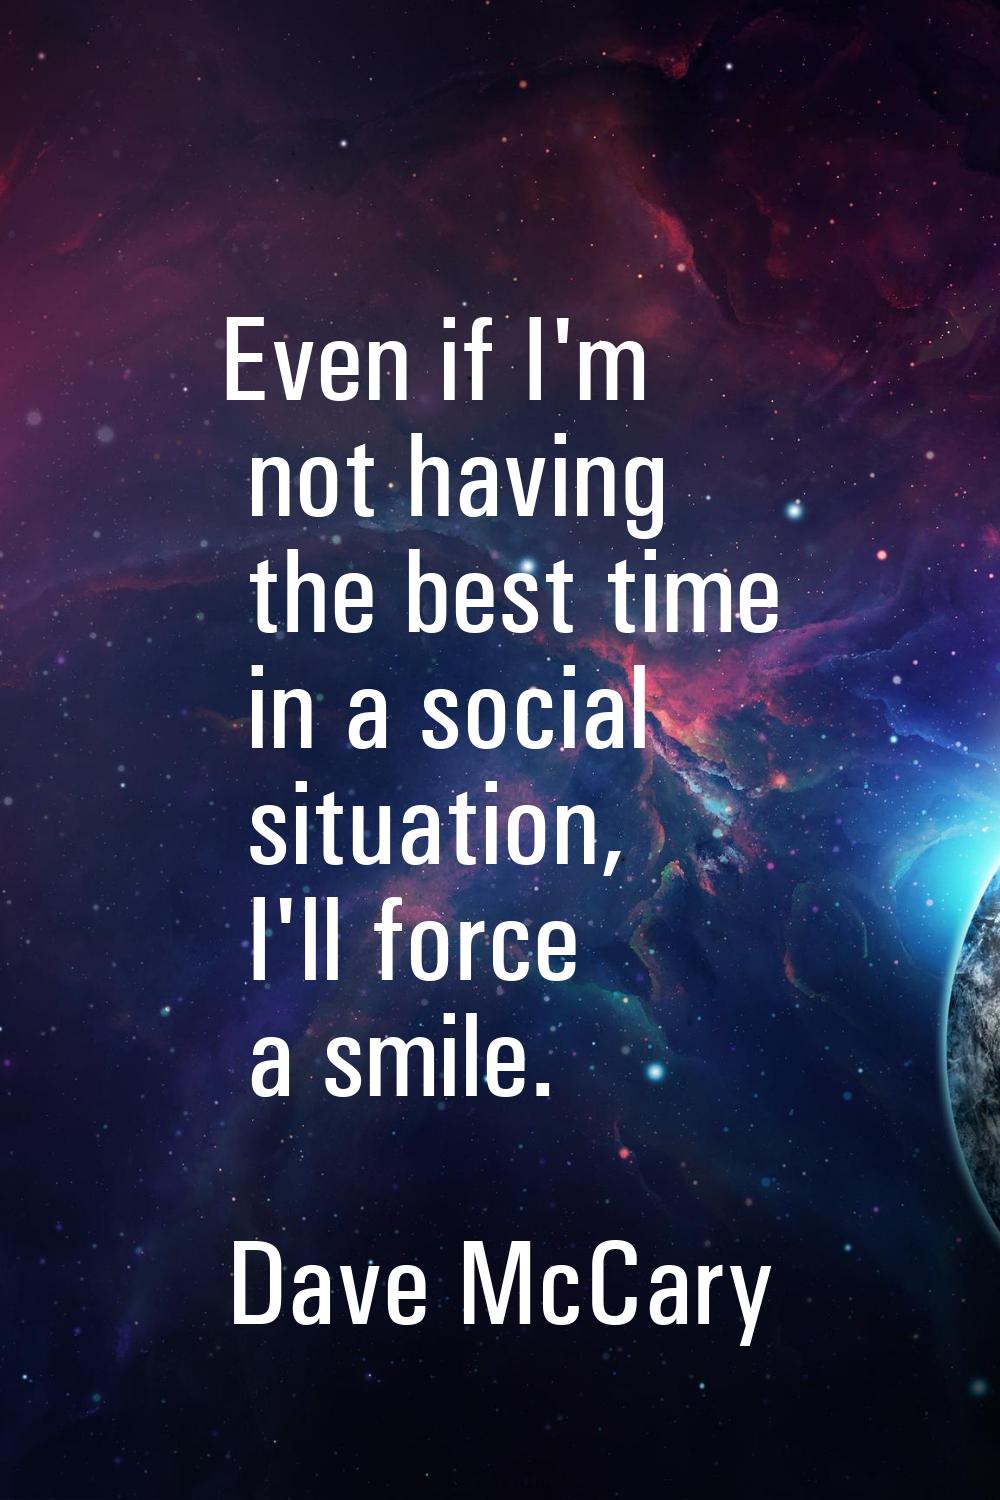 Even if I'm not having the best time in a social situation, I'll force a smile.